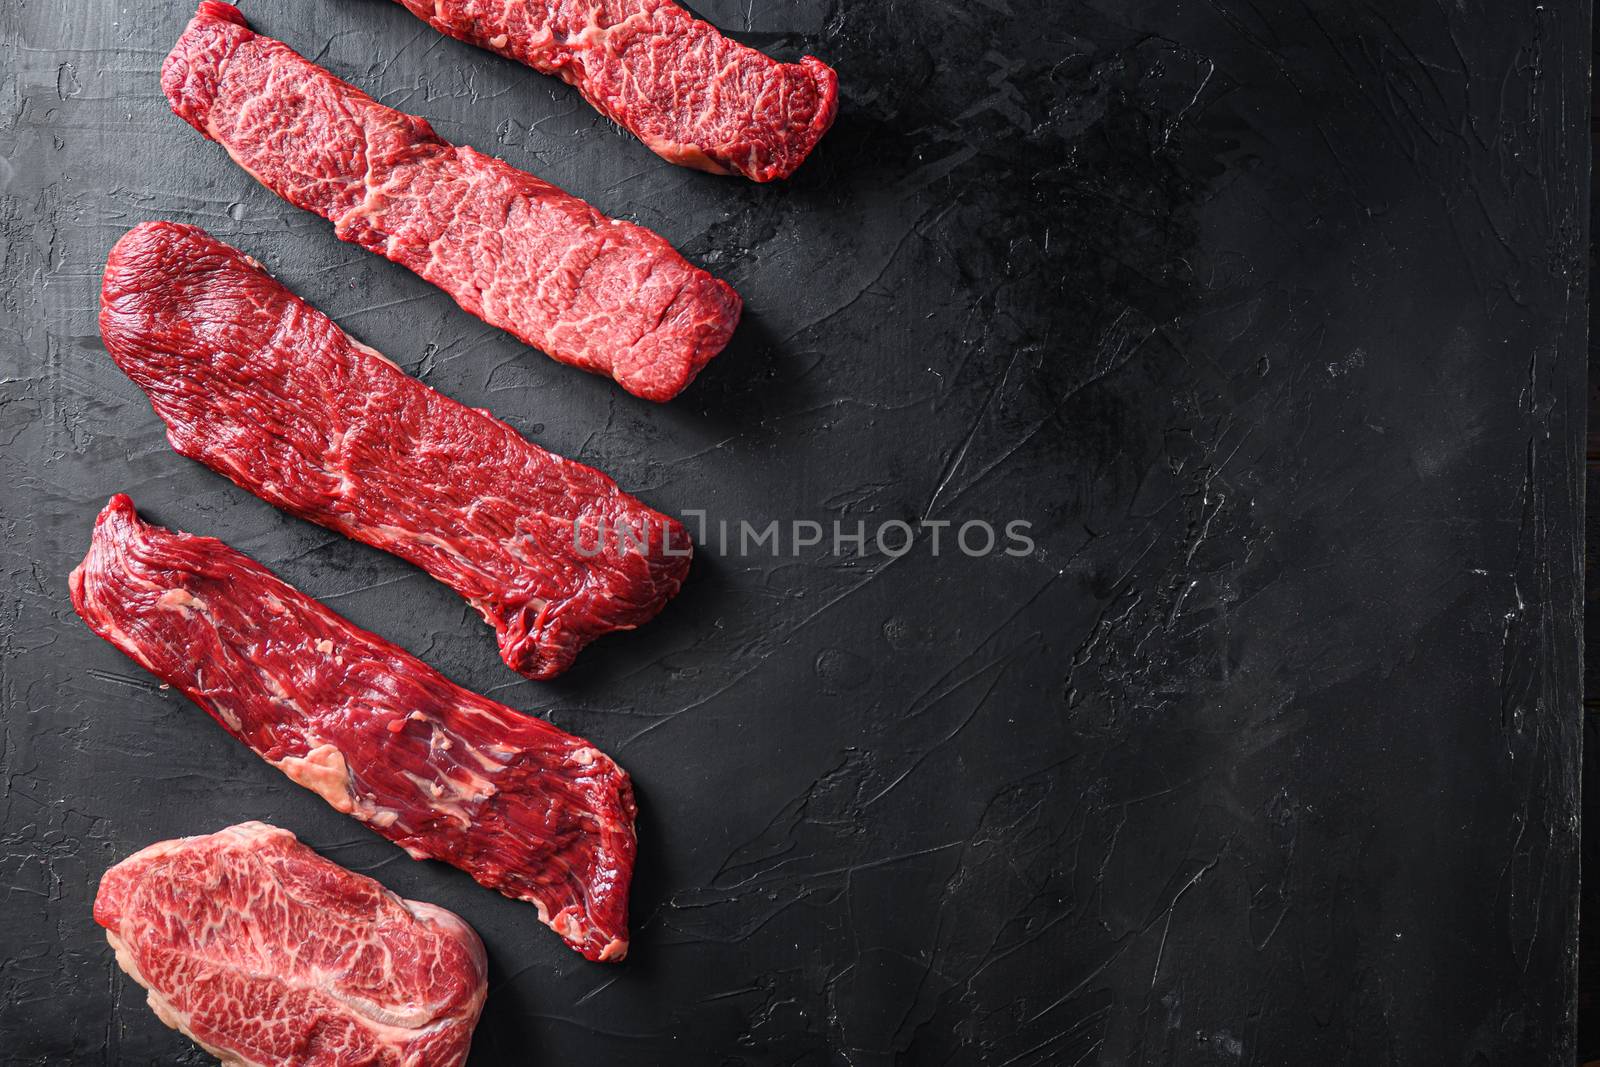 Raw, alternative beef steaks flap flank Steak, machete steak or skirt cut, Top blade or flat iron beef and tri tip, triangle roast with denver cut . Black stone background. Top view. Space for text.